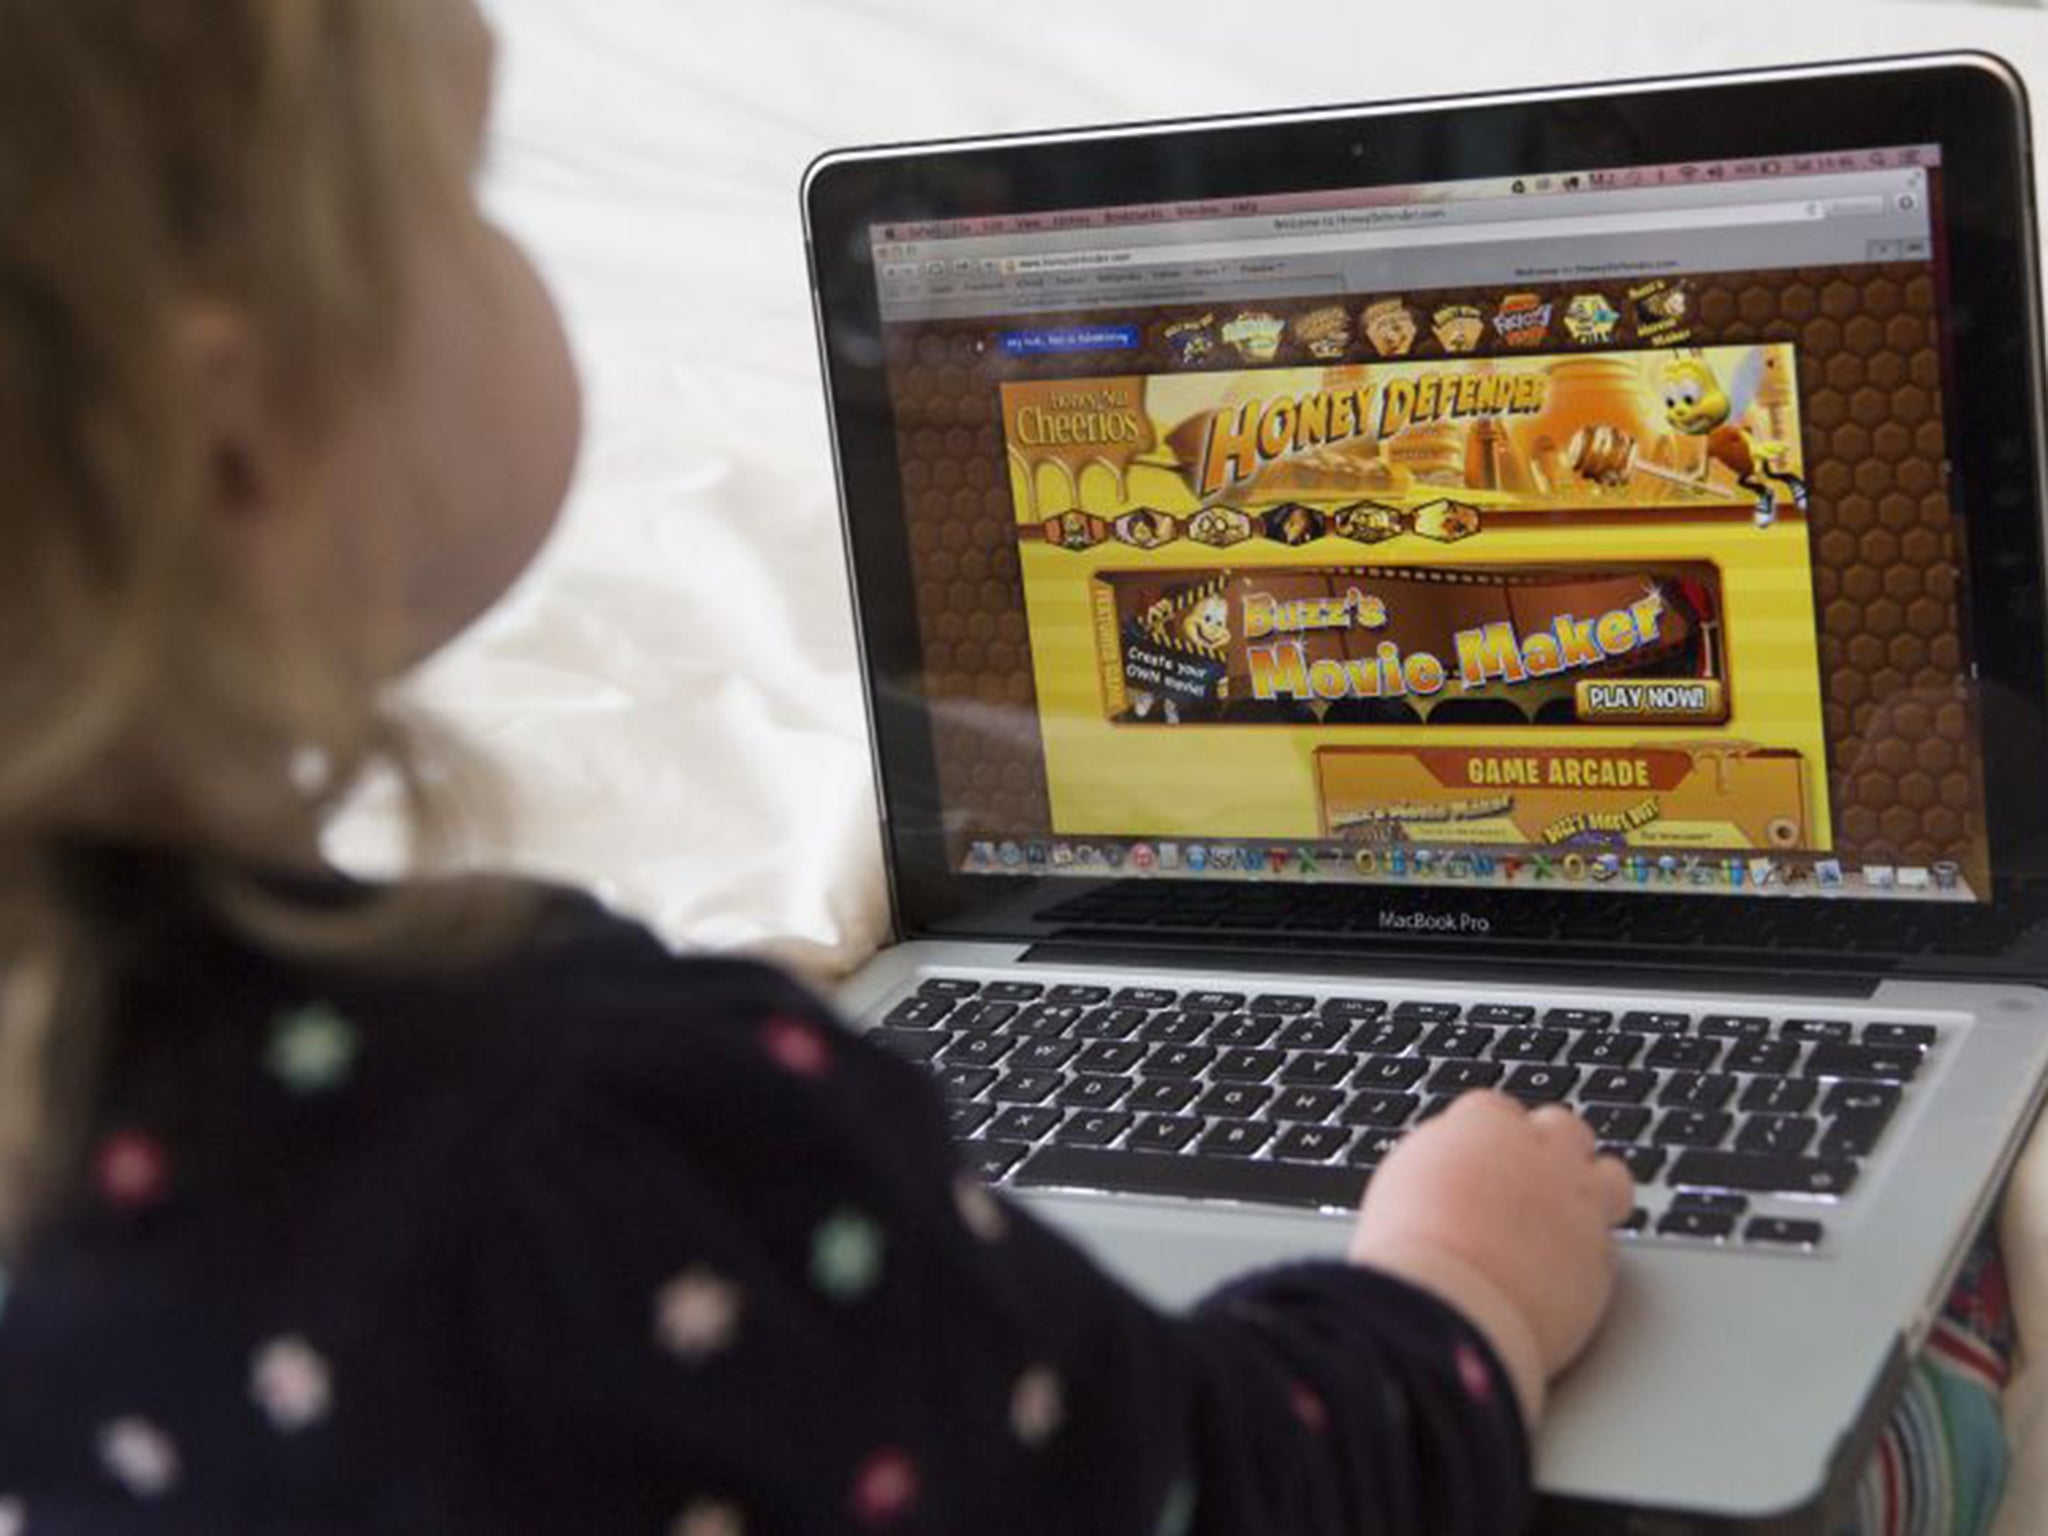 Researchers say online food advertising does not affect children’s diets